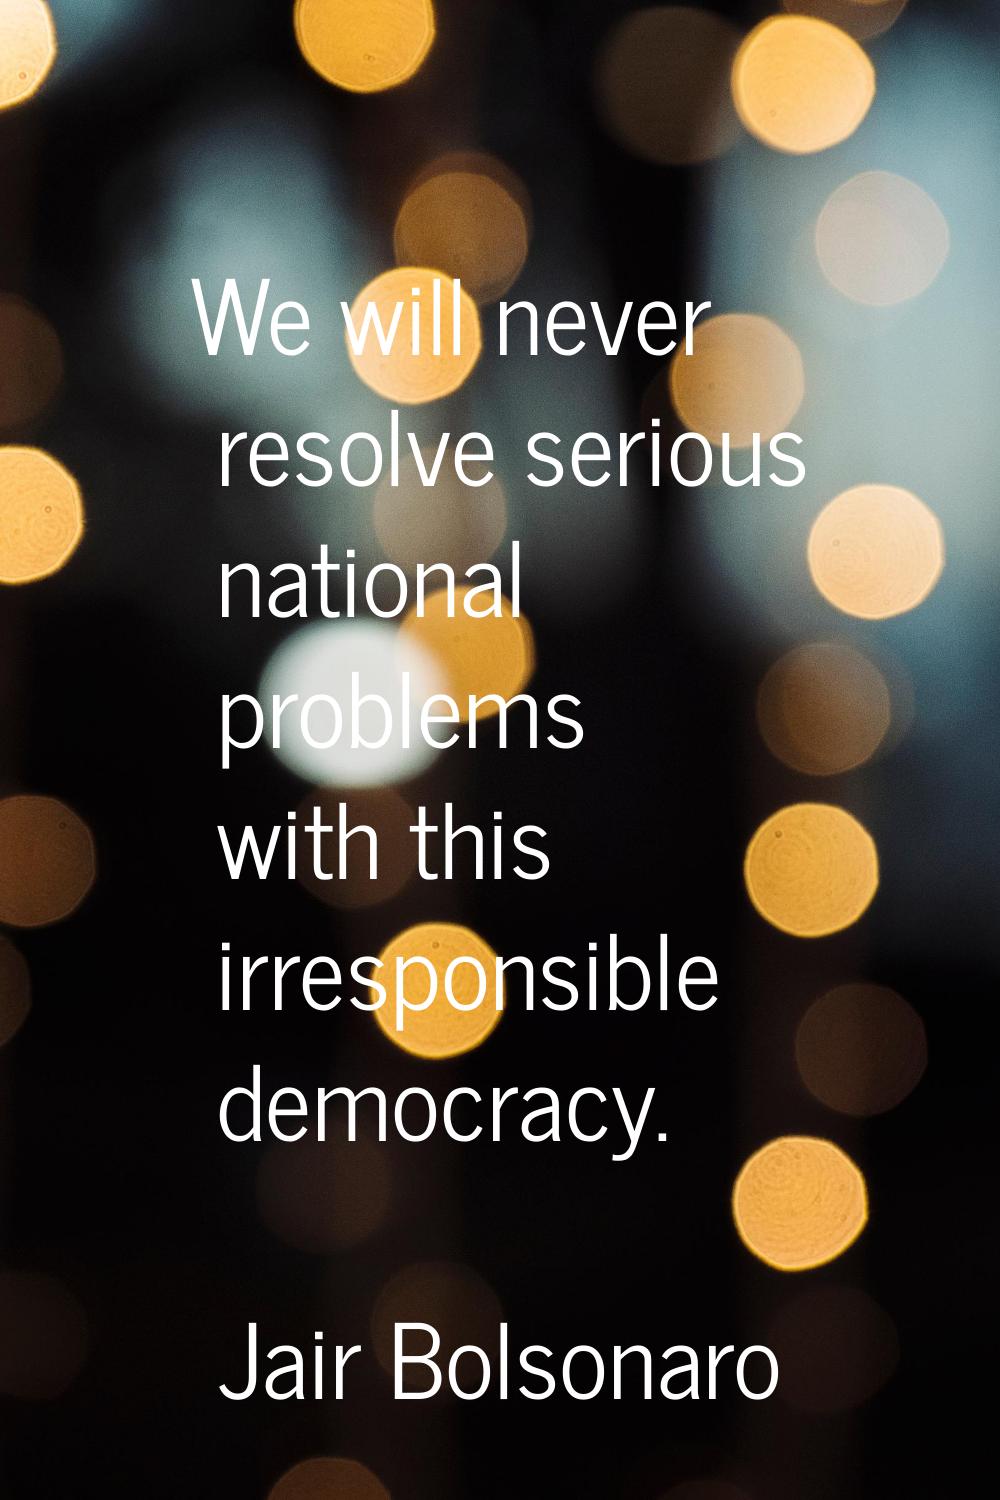 We will never resolve serious national problems with this irresponsible democracy.